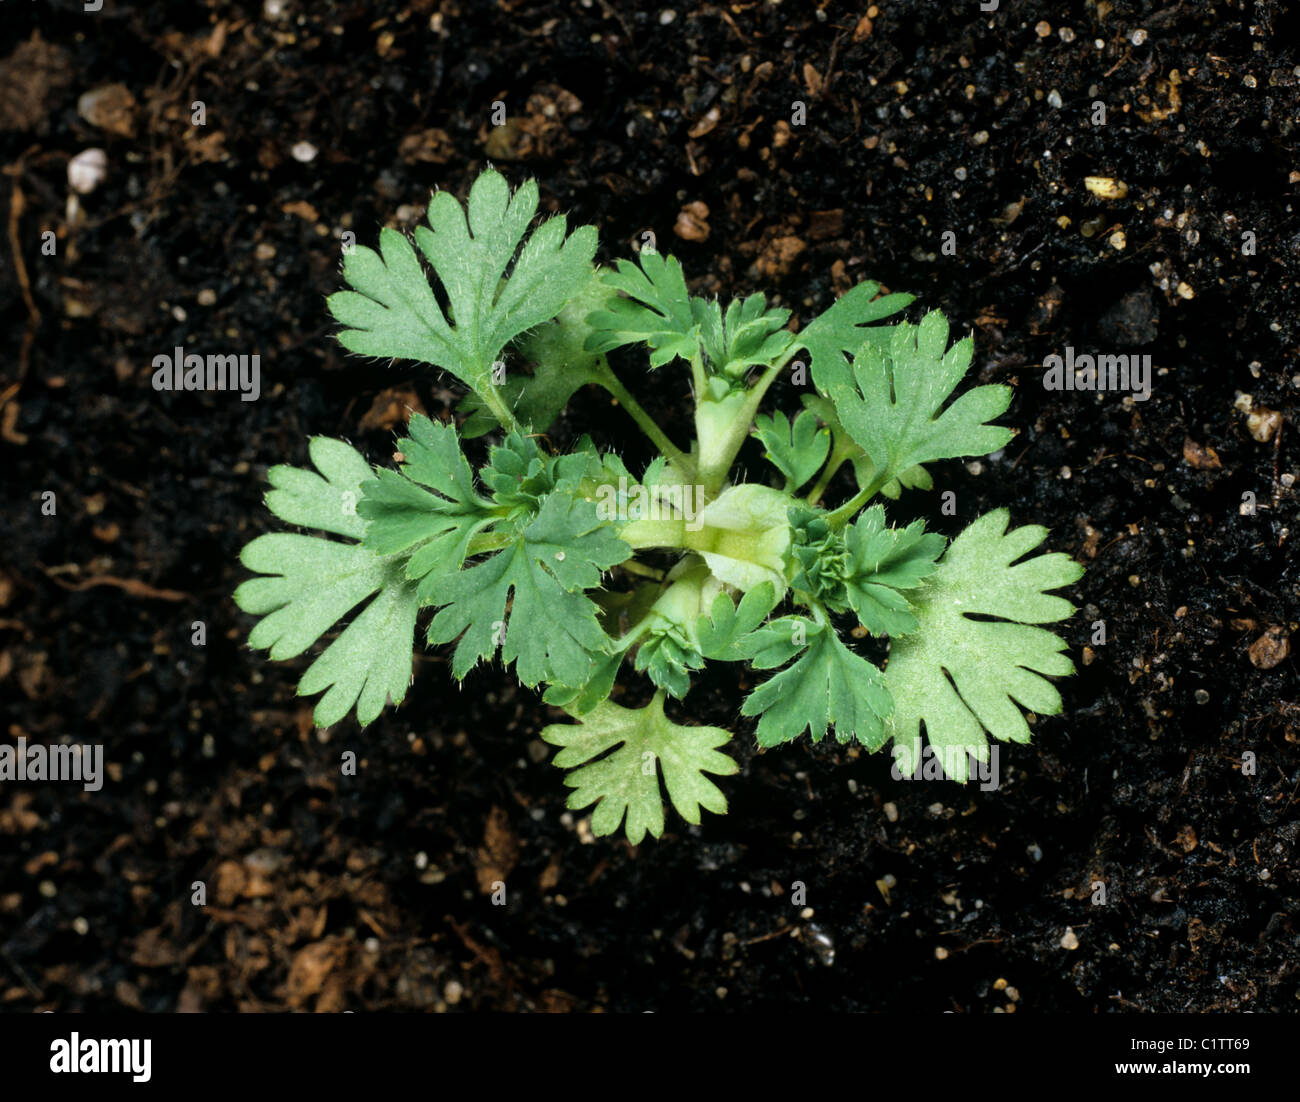 Parsley piert (Aphanes arvensis) young plant Stock Photo